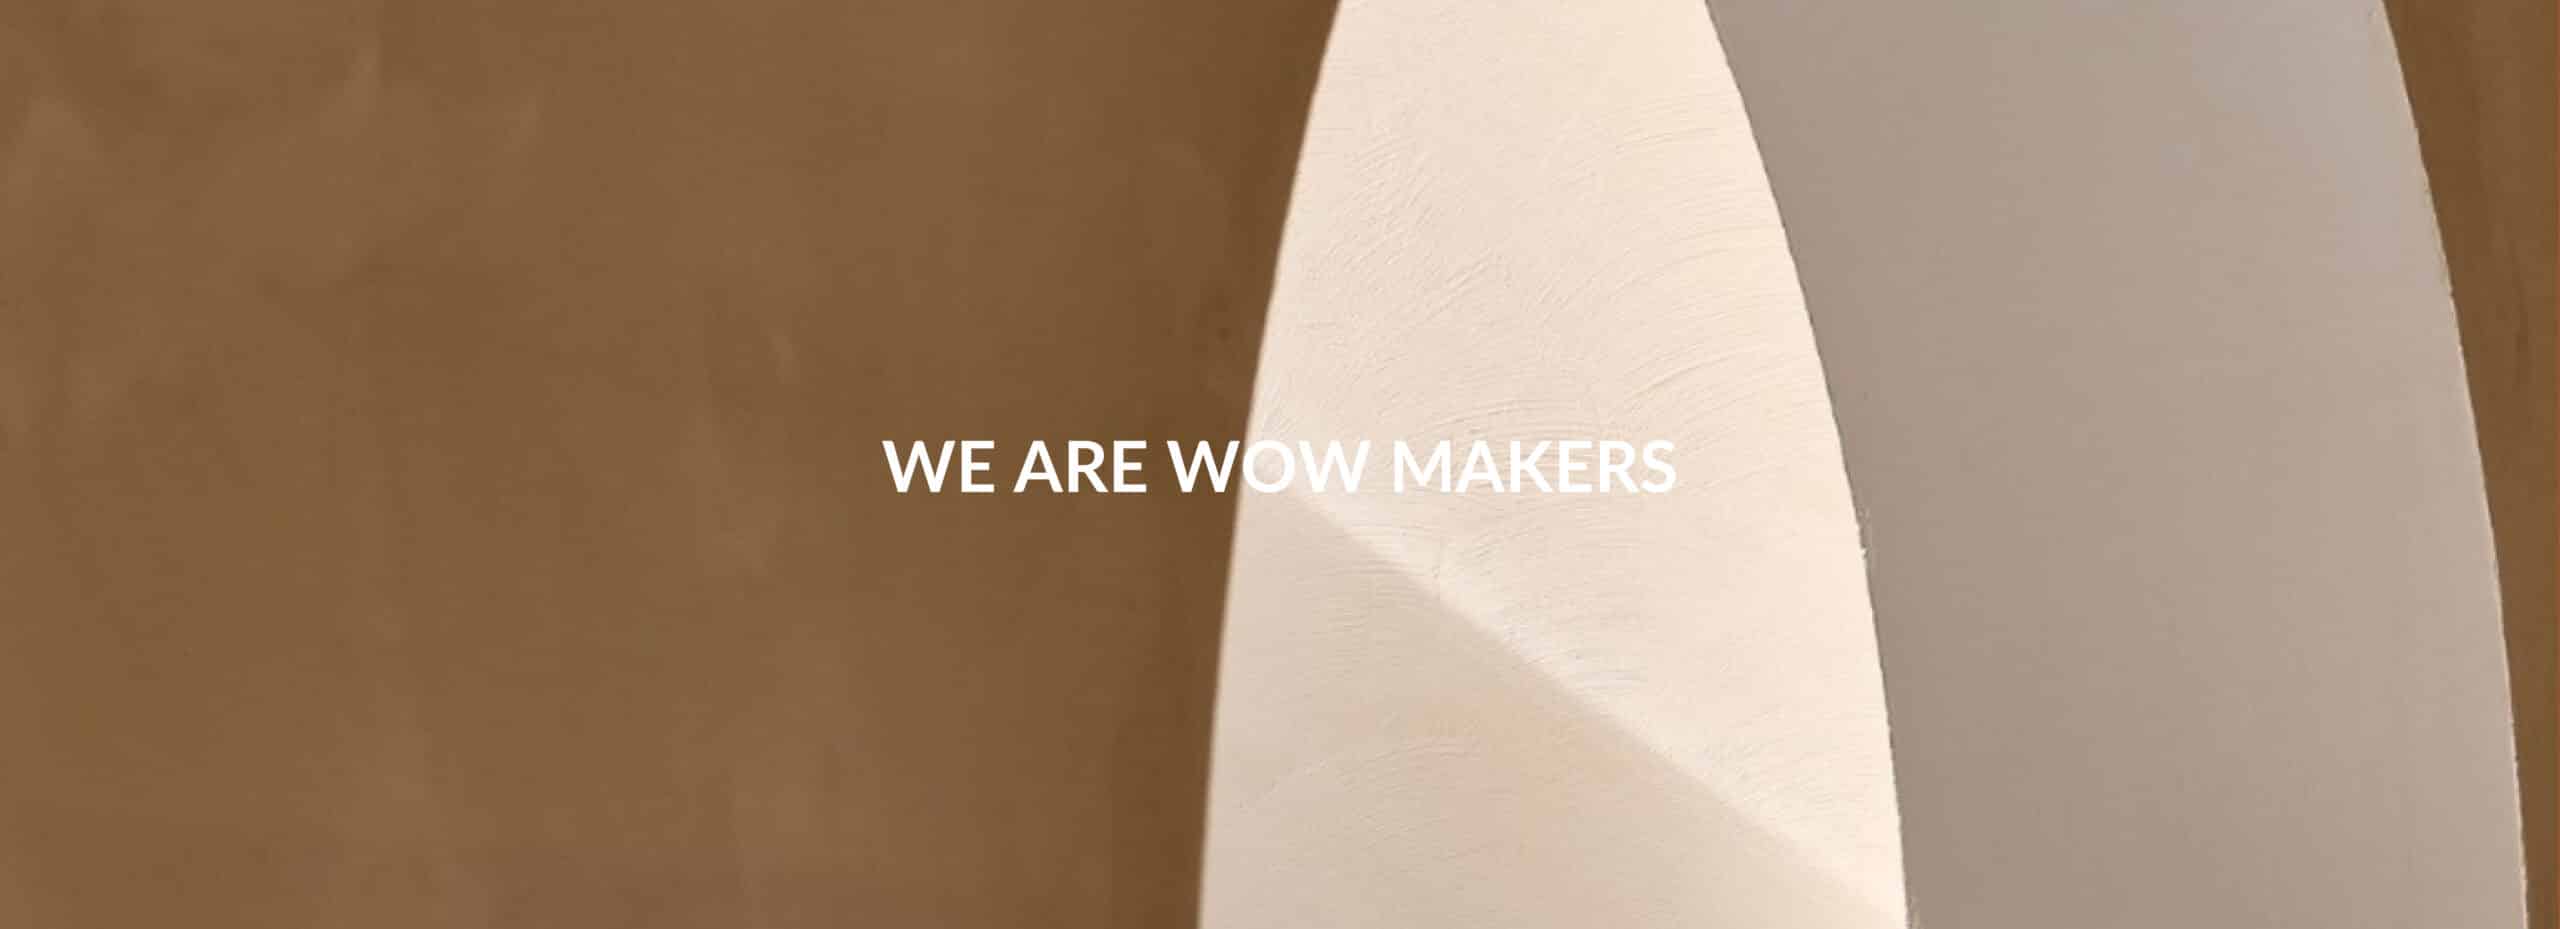 We are WOW makers